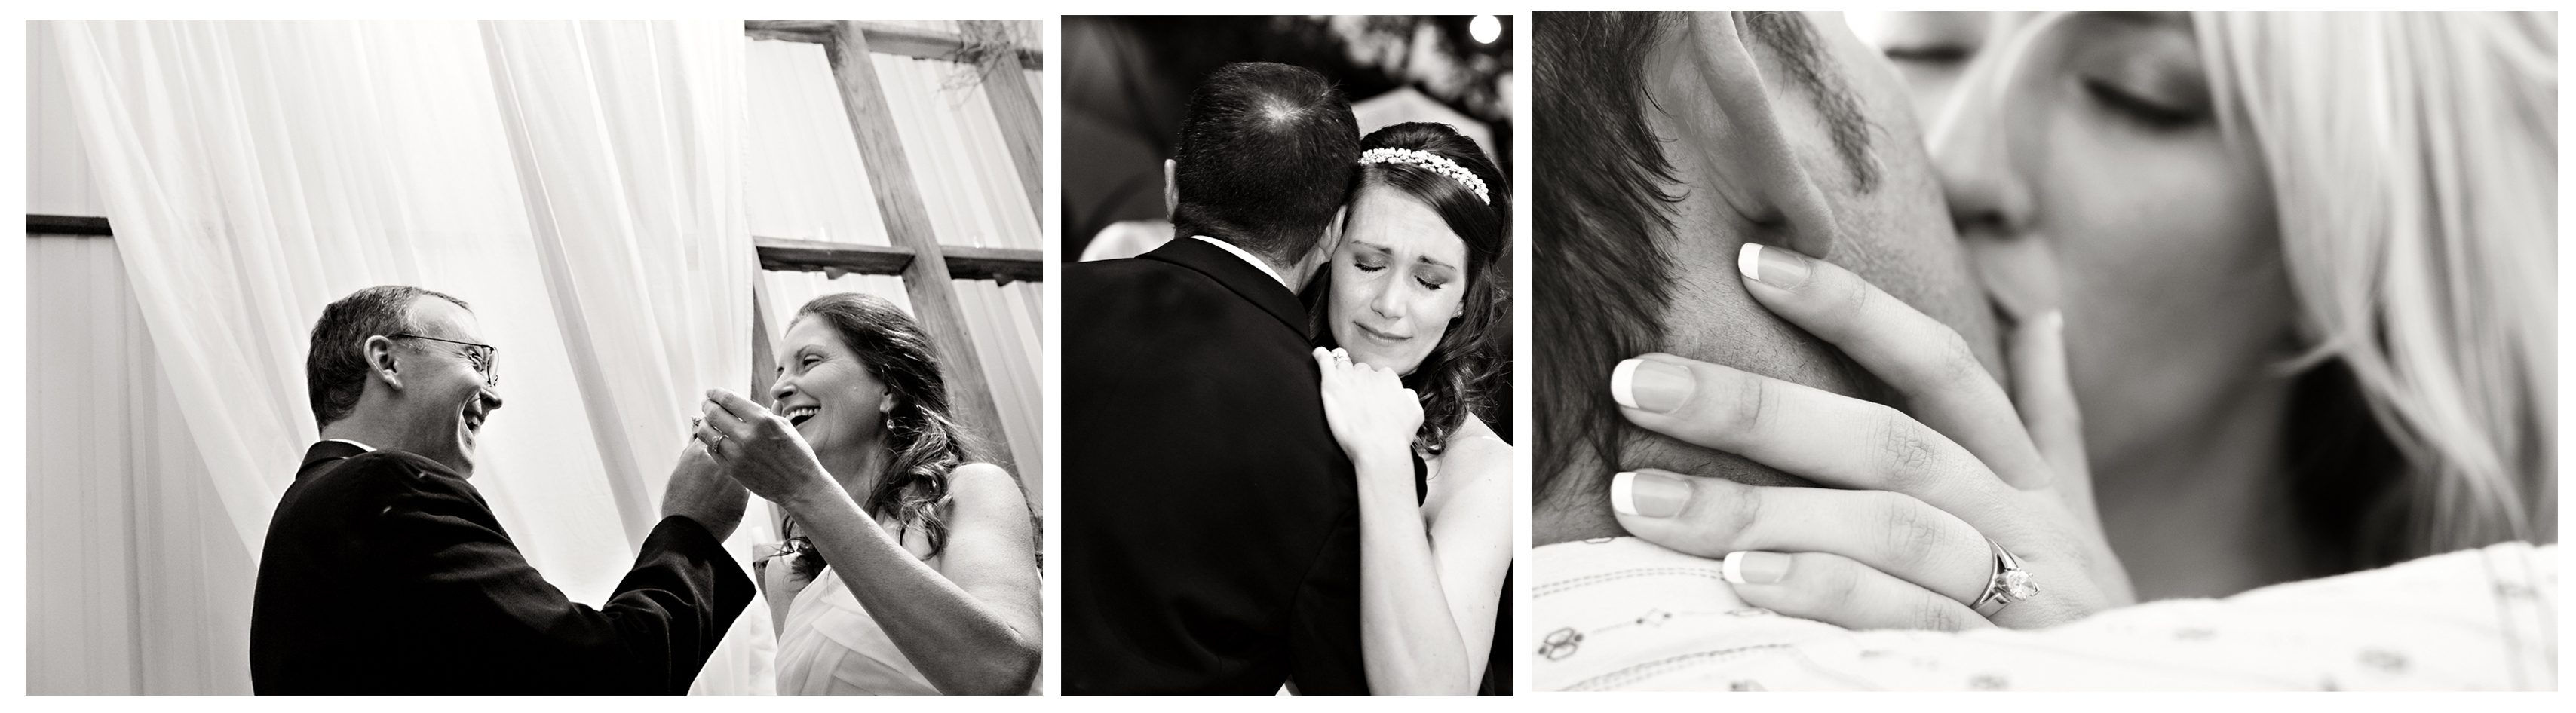 not-your-mothers-wedding-photographer-dallas-copyright-breonny-lee-bw-2